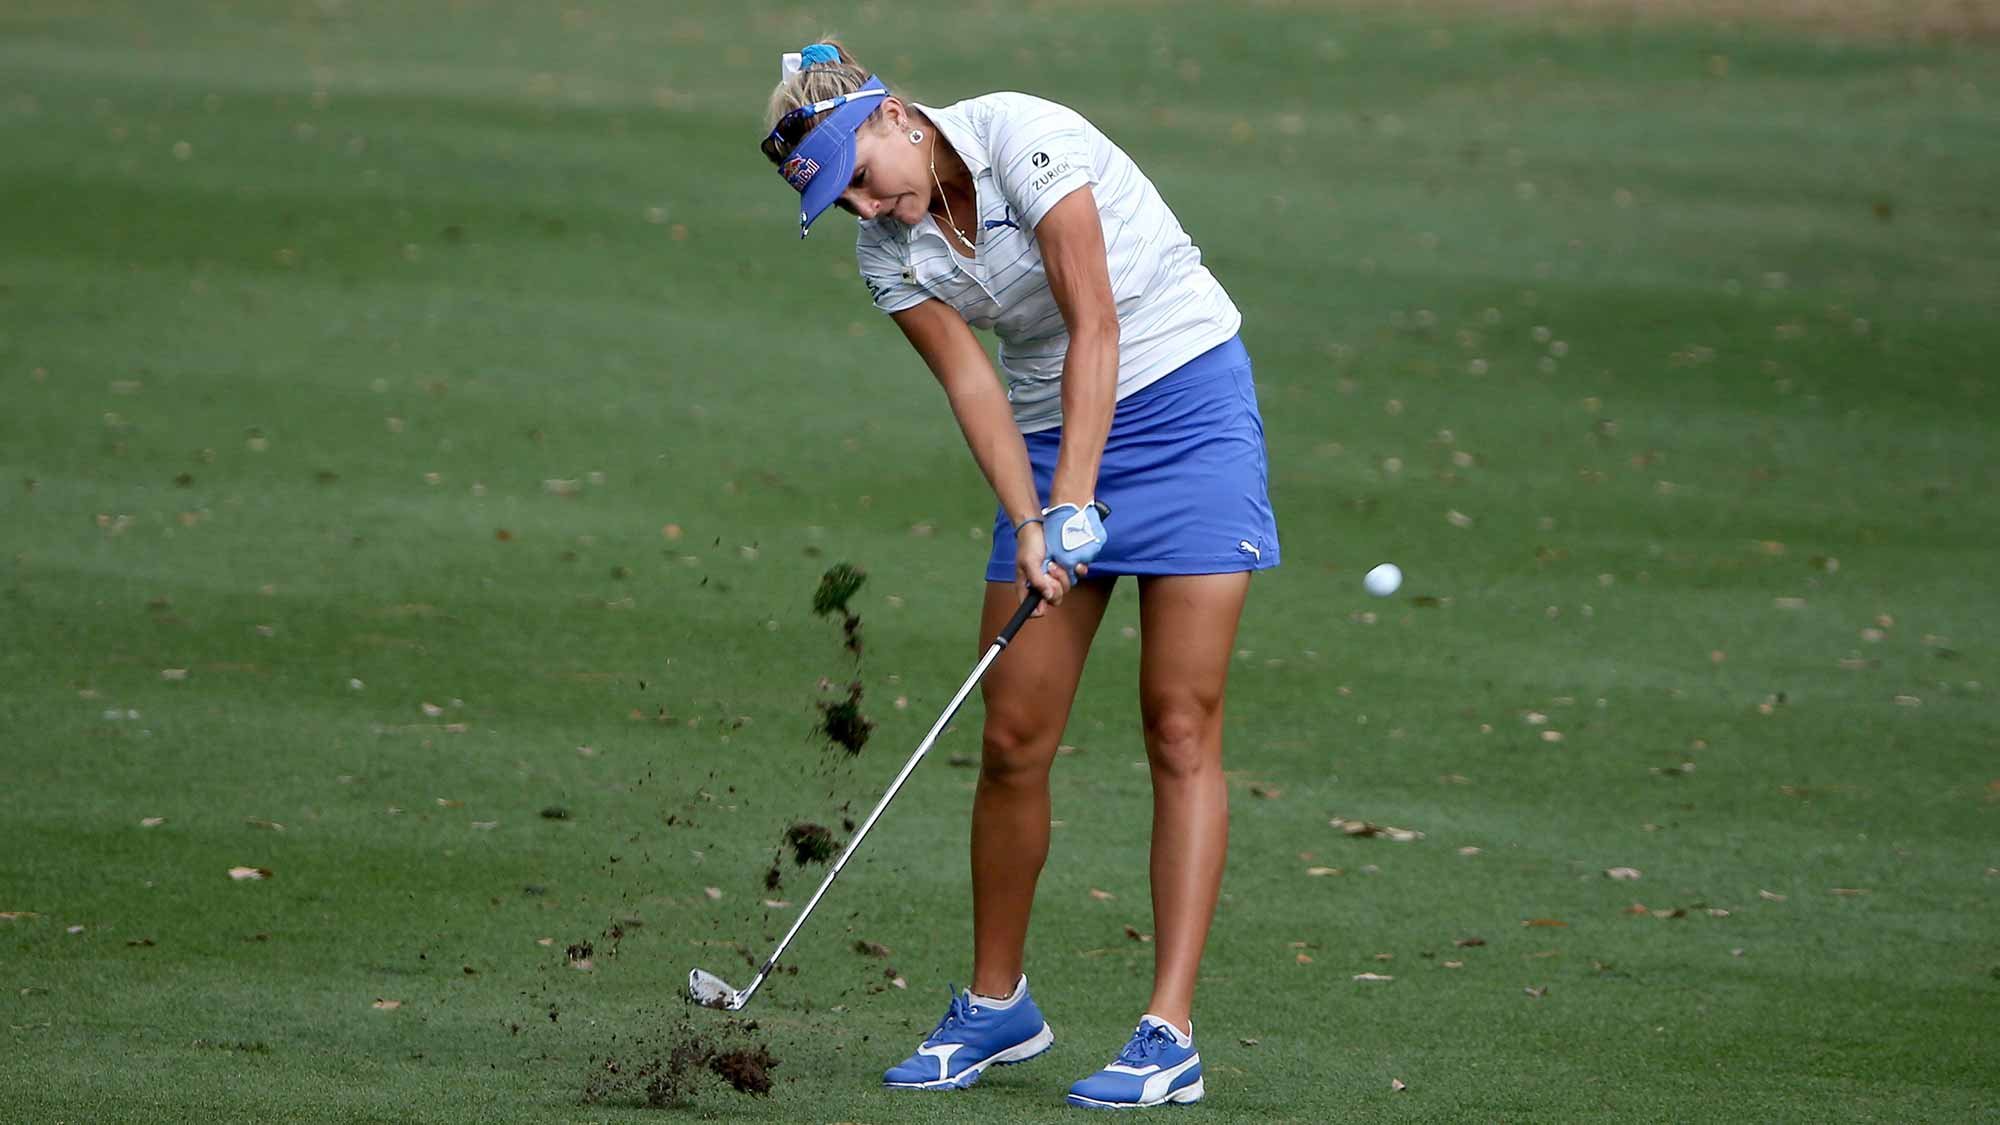 Lexi Thompson of the United States plays a shot on the eighth hole during the first round of the Coates Golf Championship Presented By R+L Carriers at Golden Ocala Golf Club